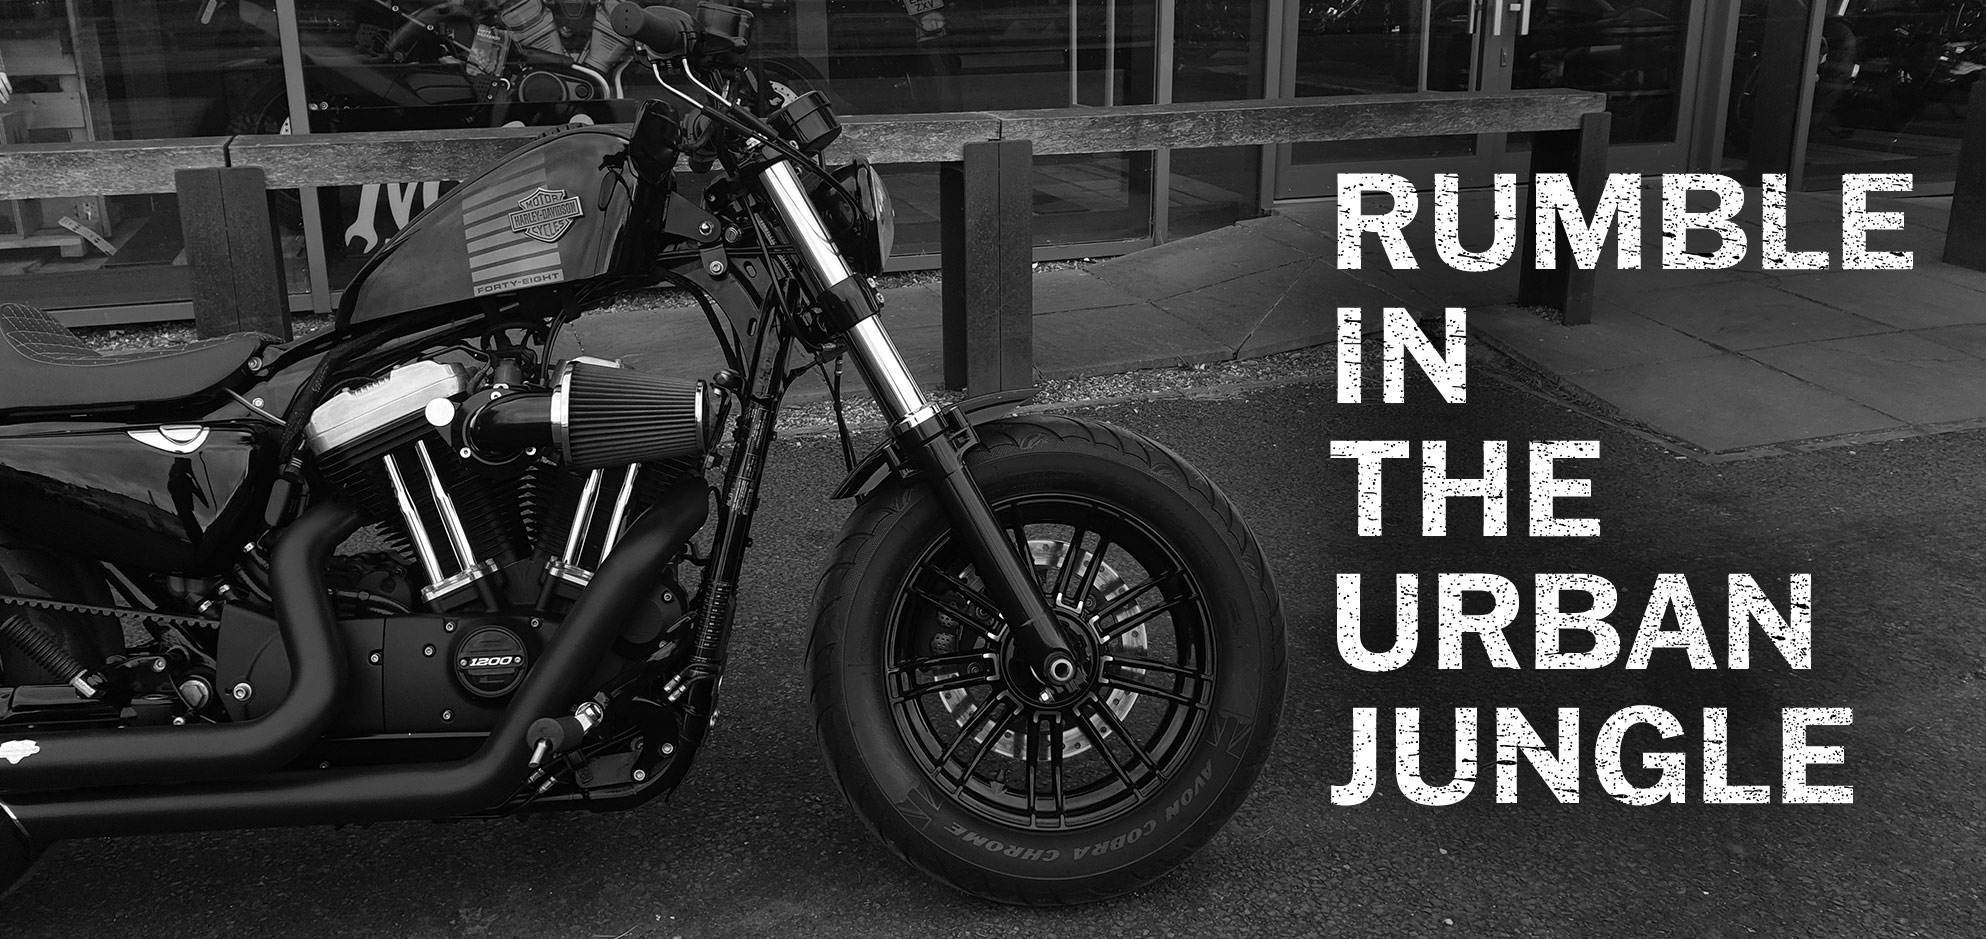 The Harley-Davidson Forty-Eight Sportster - Rumble in the Urban Jungle